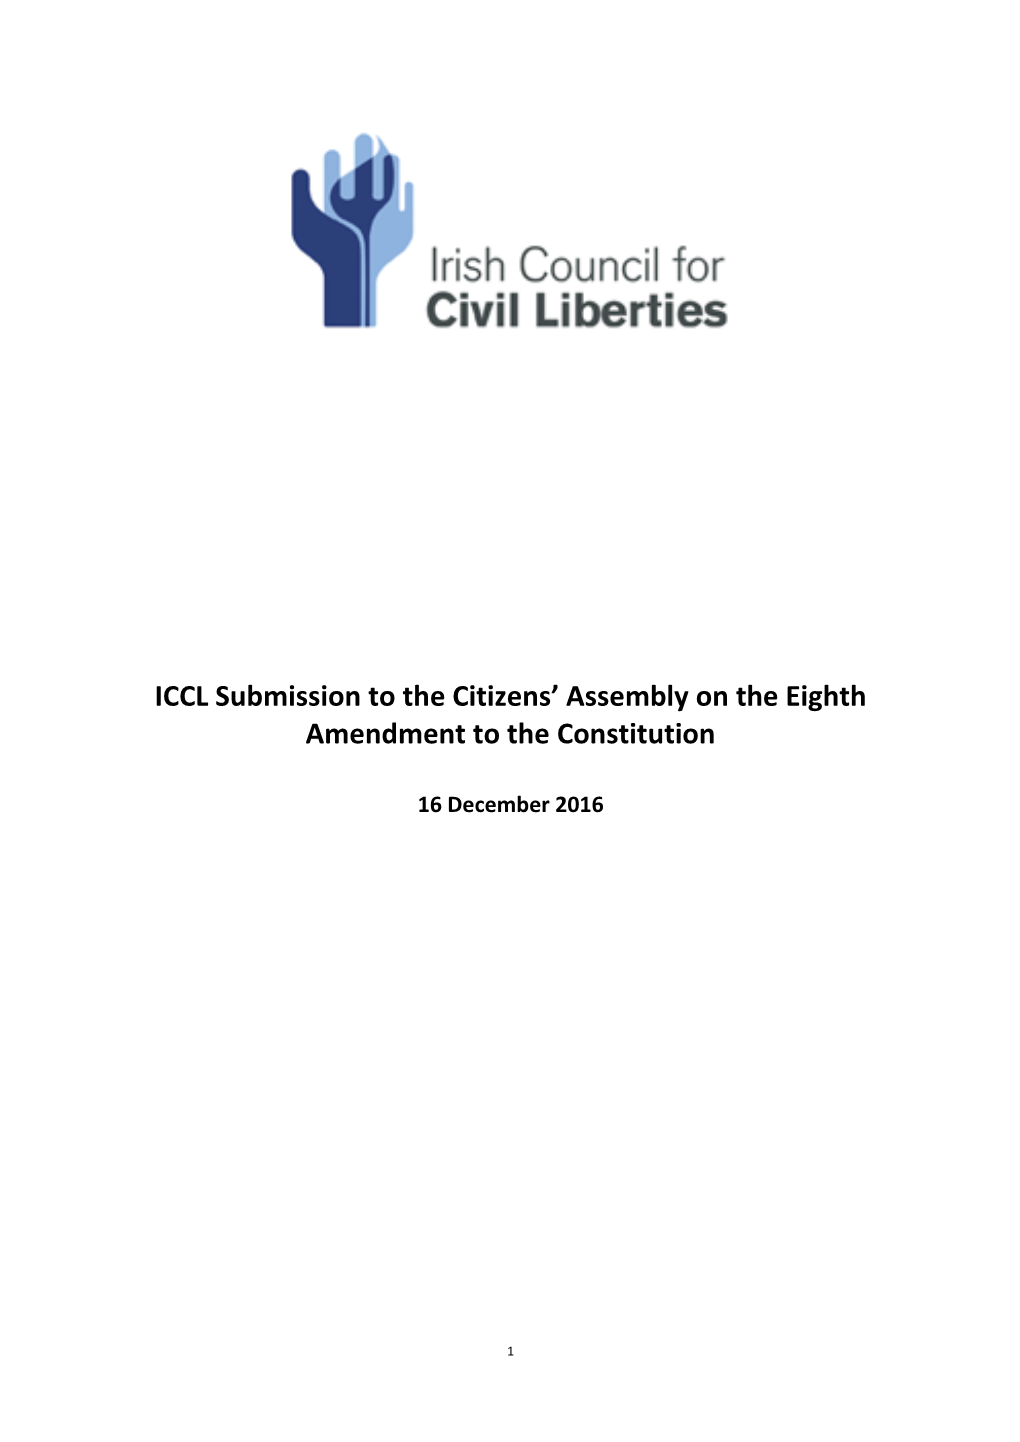 ICCL Submission to the Citizens' Assembly on the Eighth